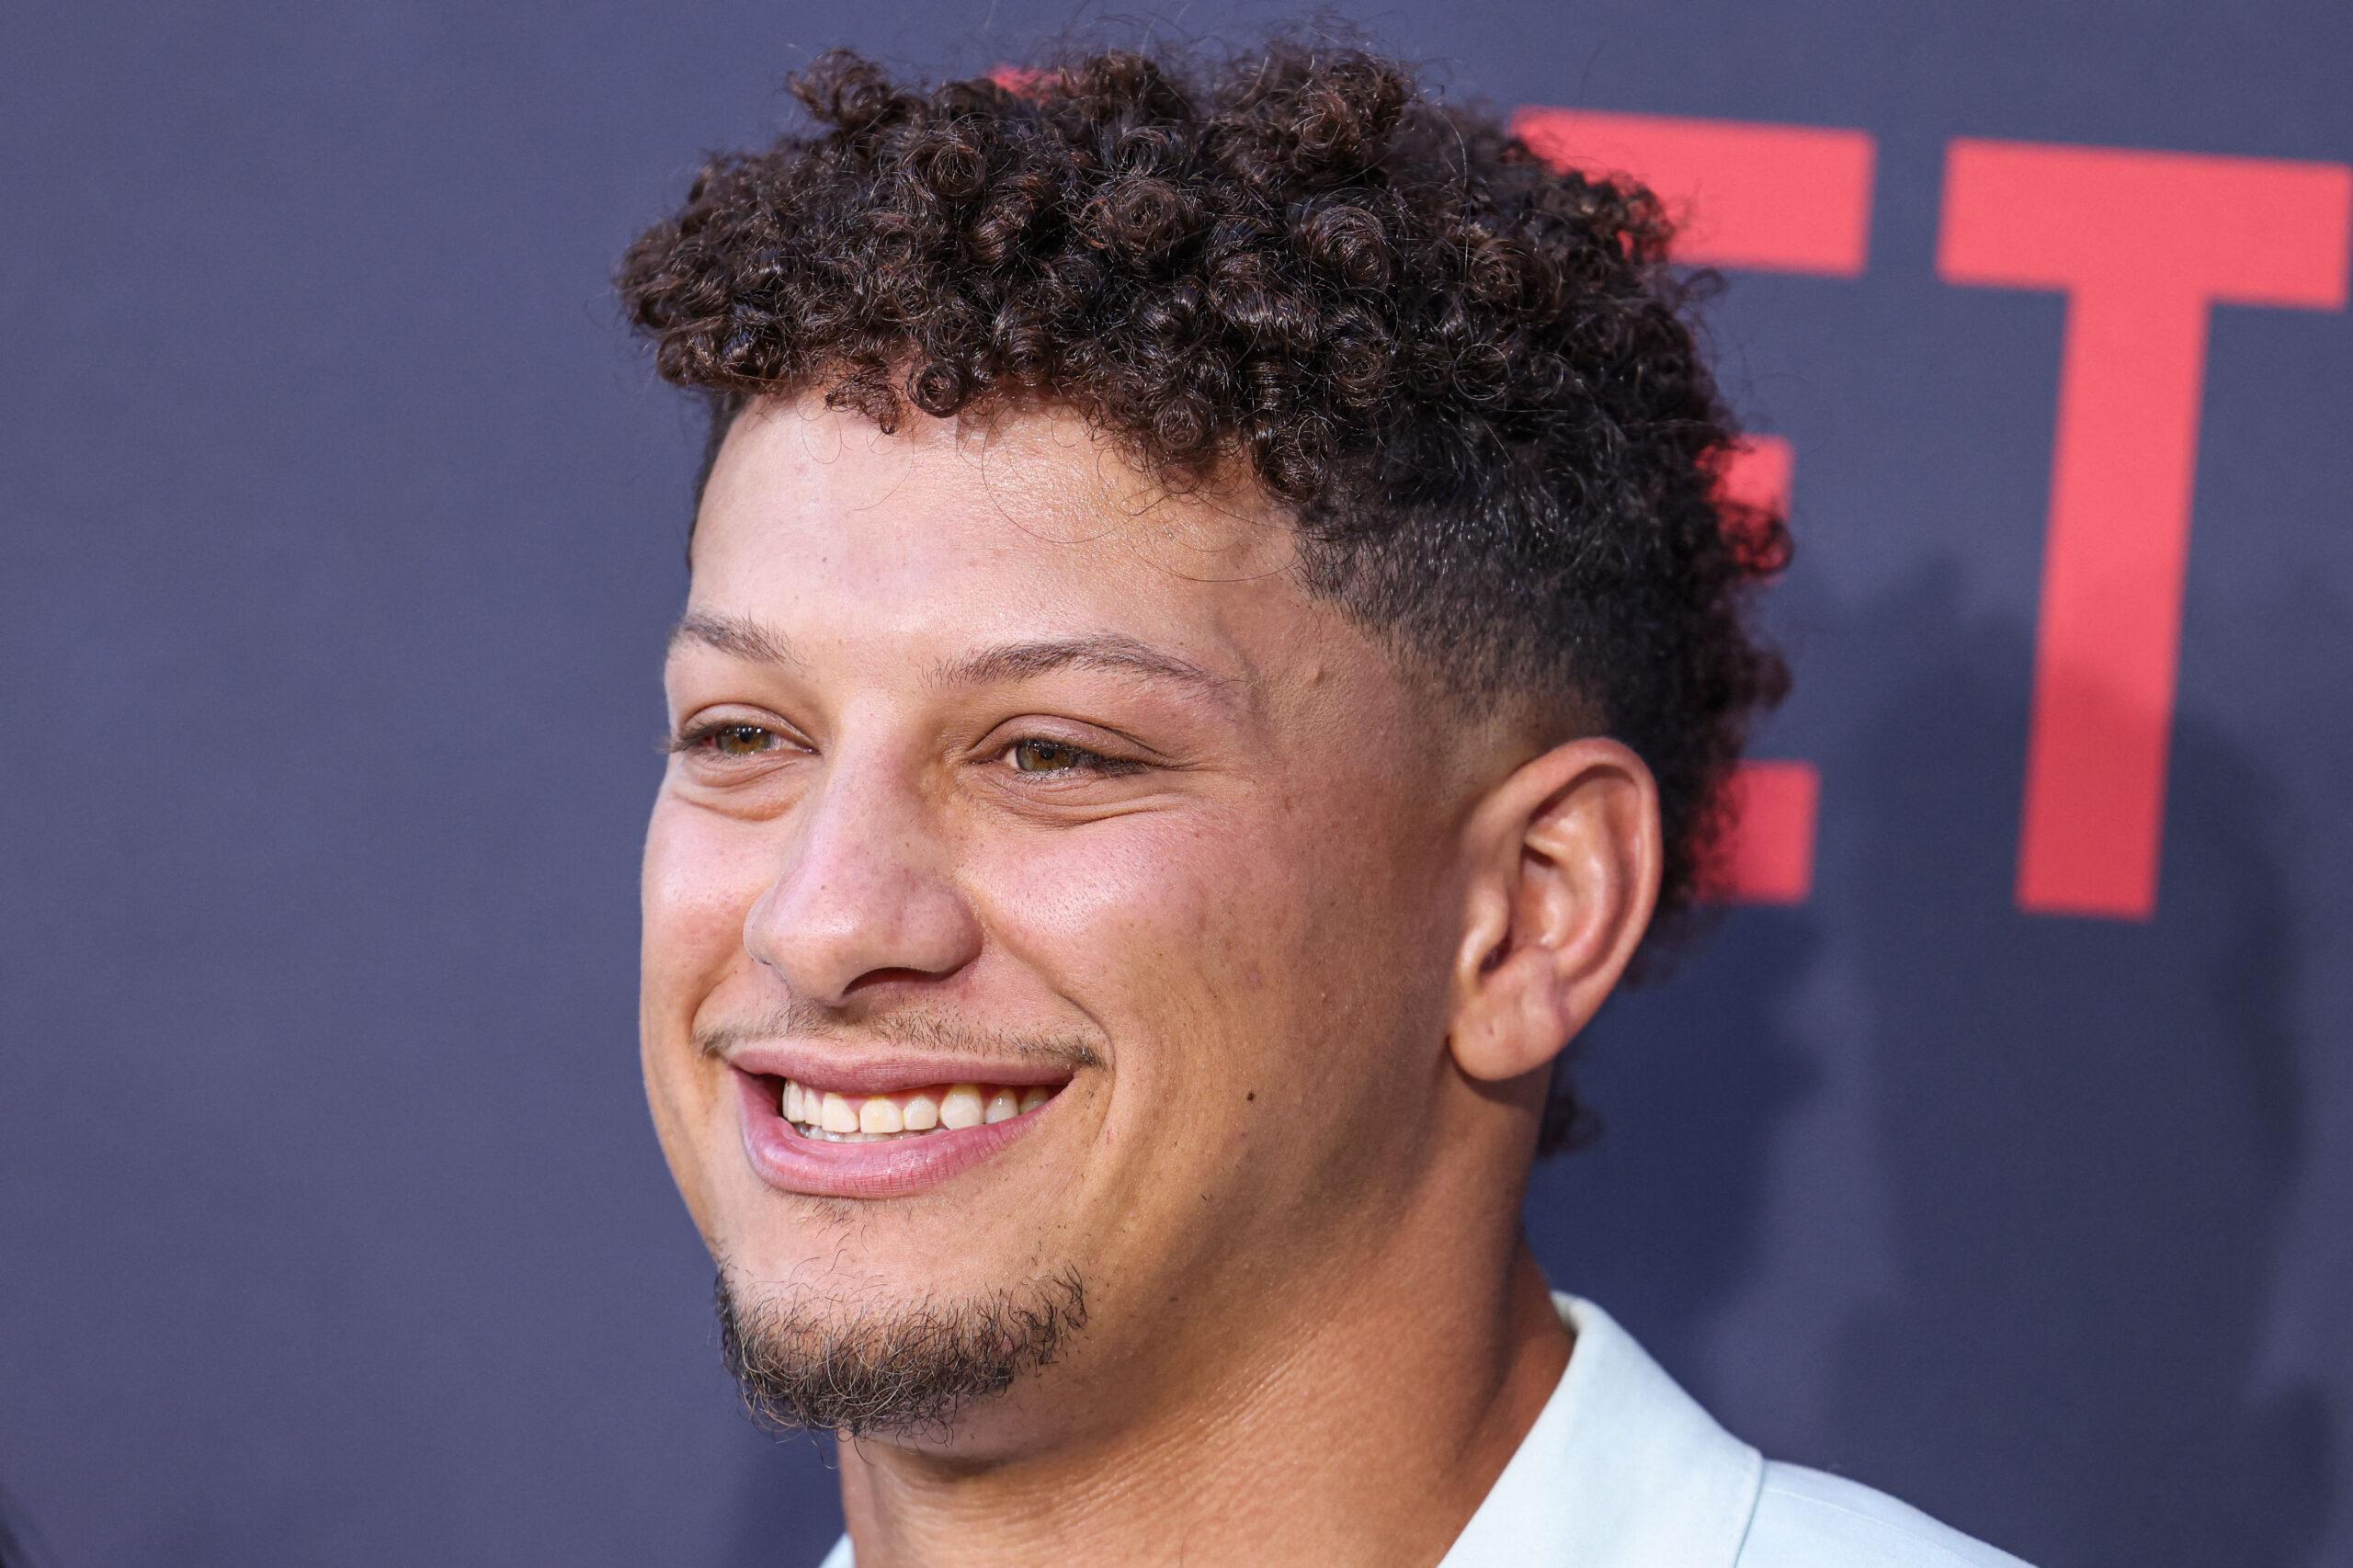 NFL's Patrick Mahomes Breaks Silence On His Dad's DUI Arrest